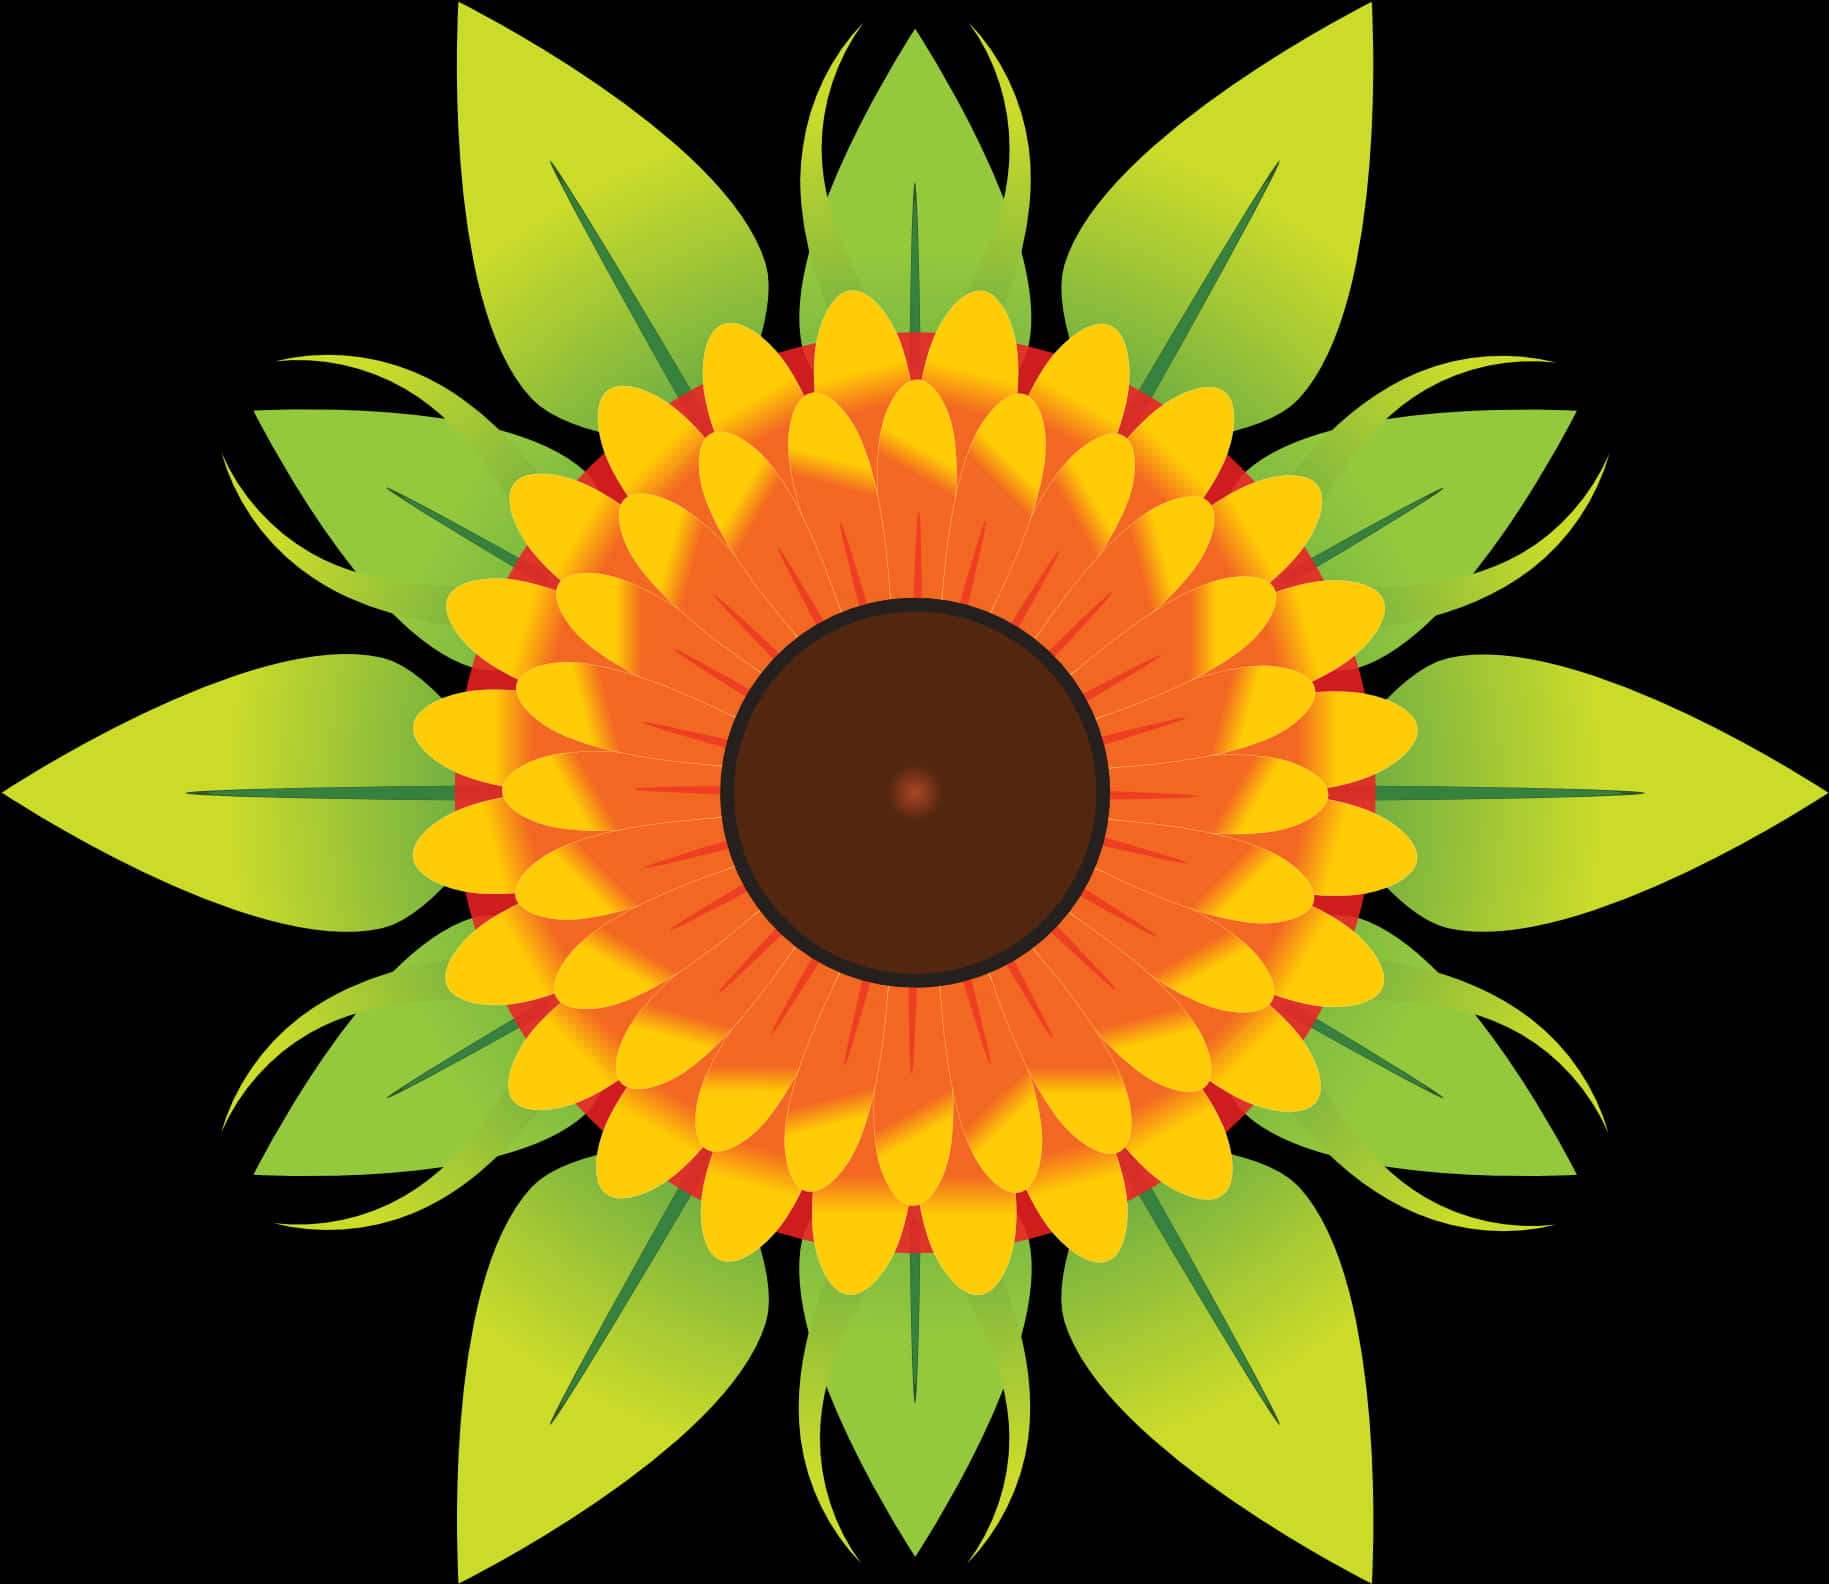 A Sunflower With Leaves